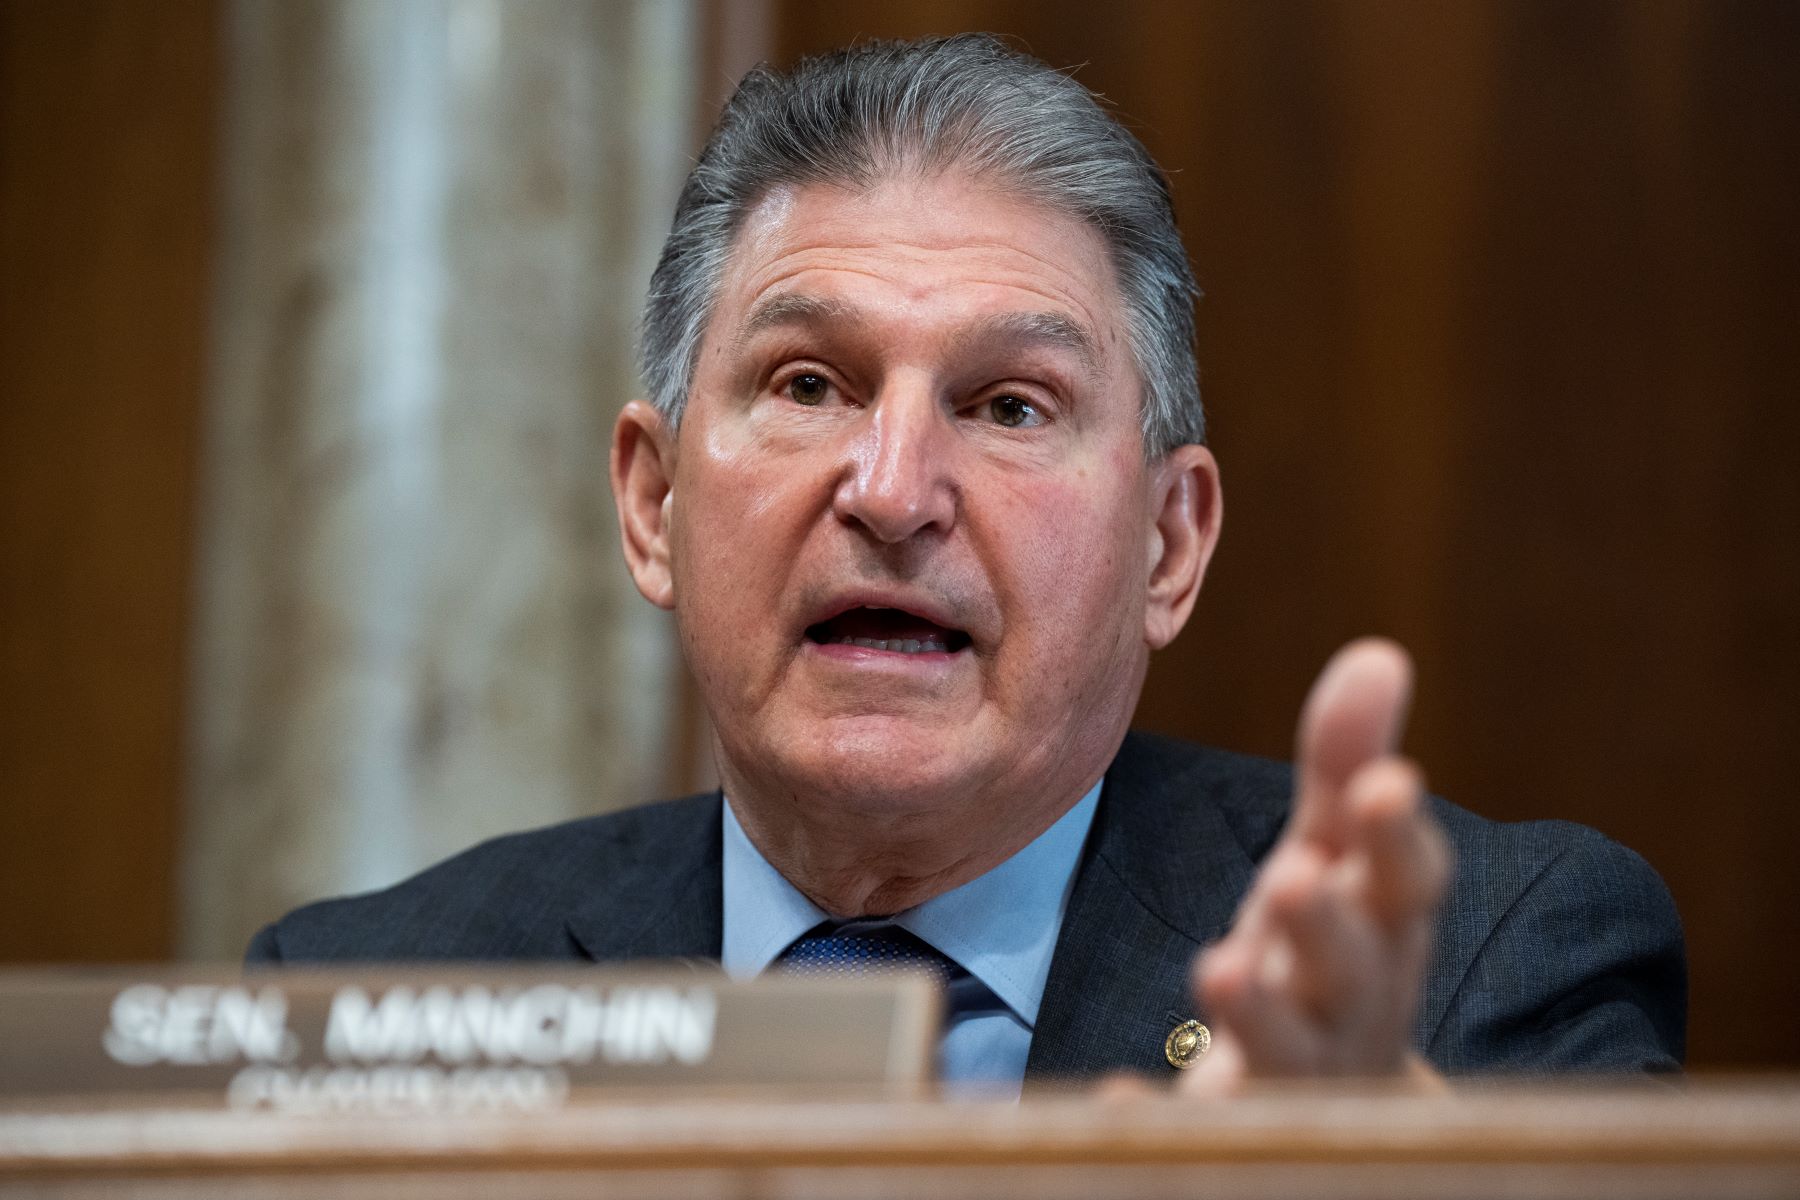 Senator Joe Manchin as Chairman of the Senate Energy and Natural Resources Committee discussing a hydrogen plant